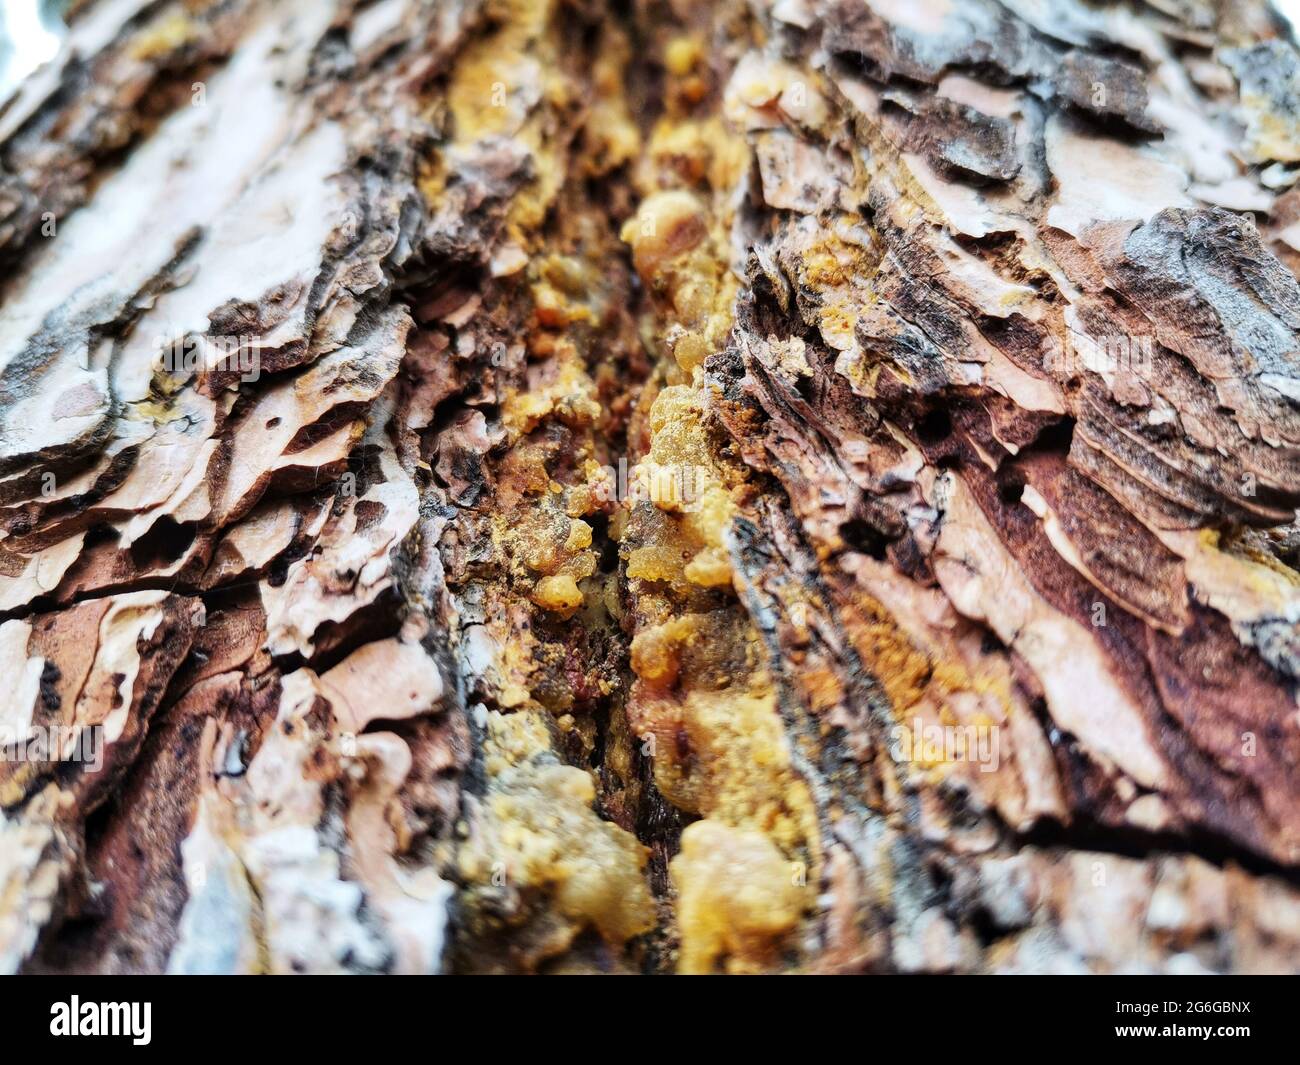 Pine resin in the pine tree trunk. Stock Photo